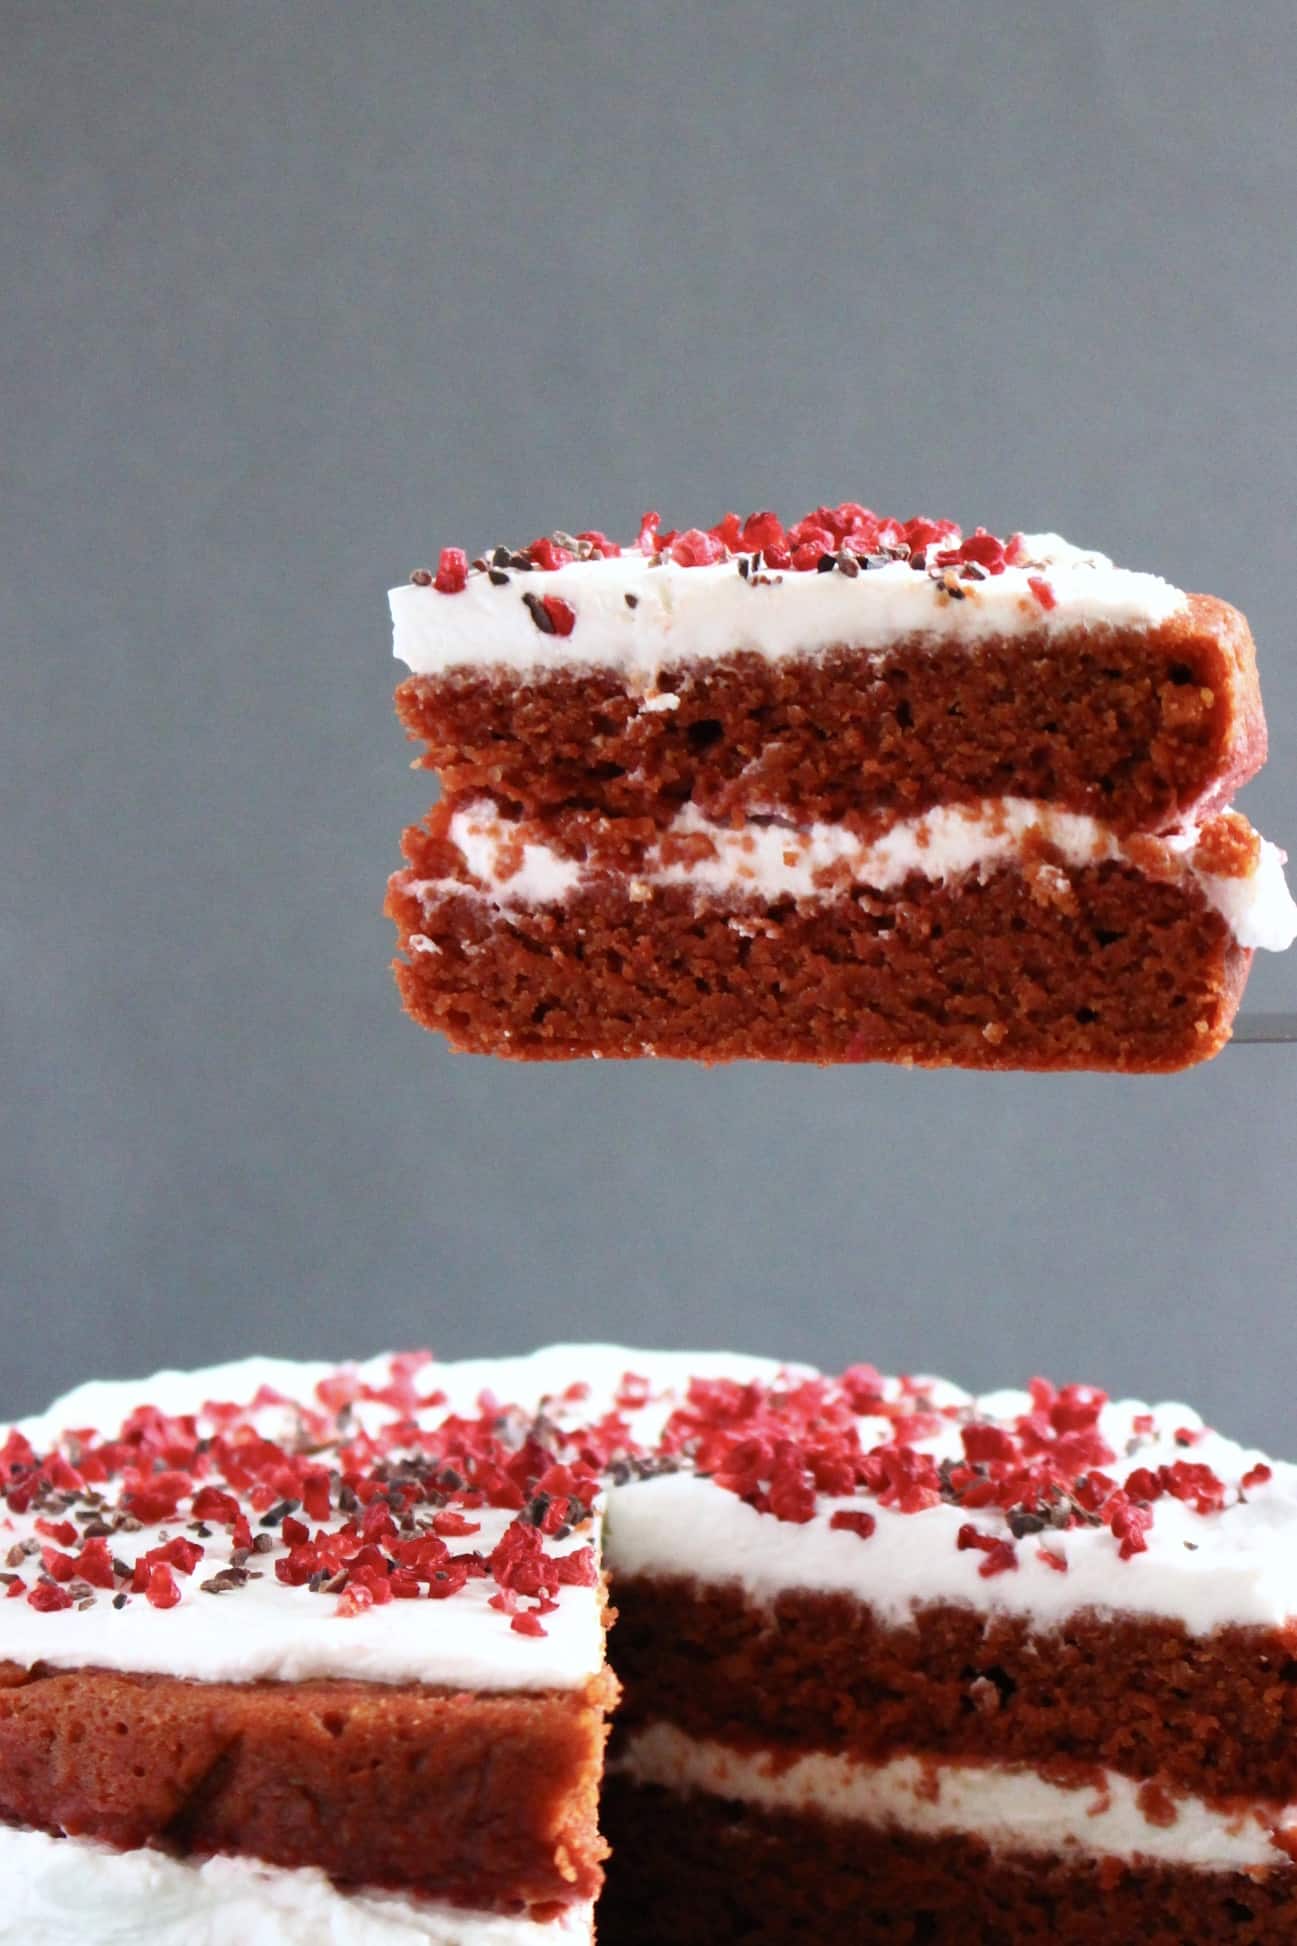 Red velvet cake with a slice being lifted up